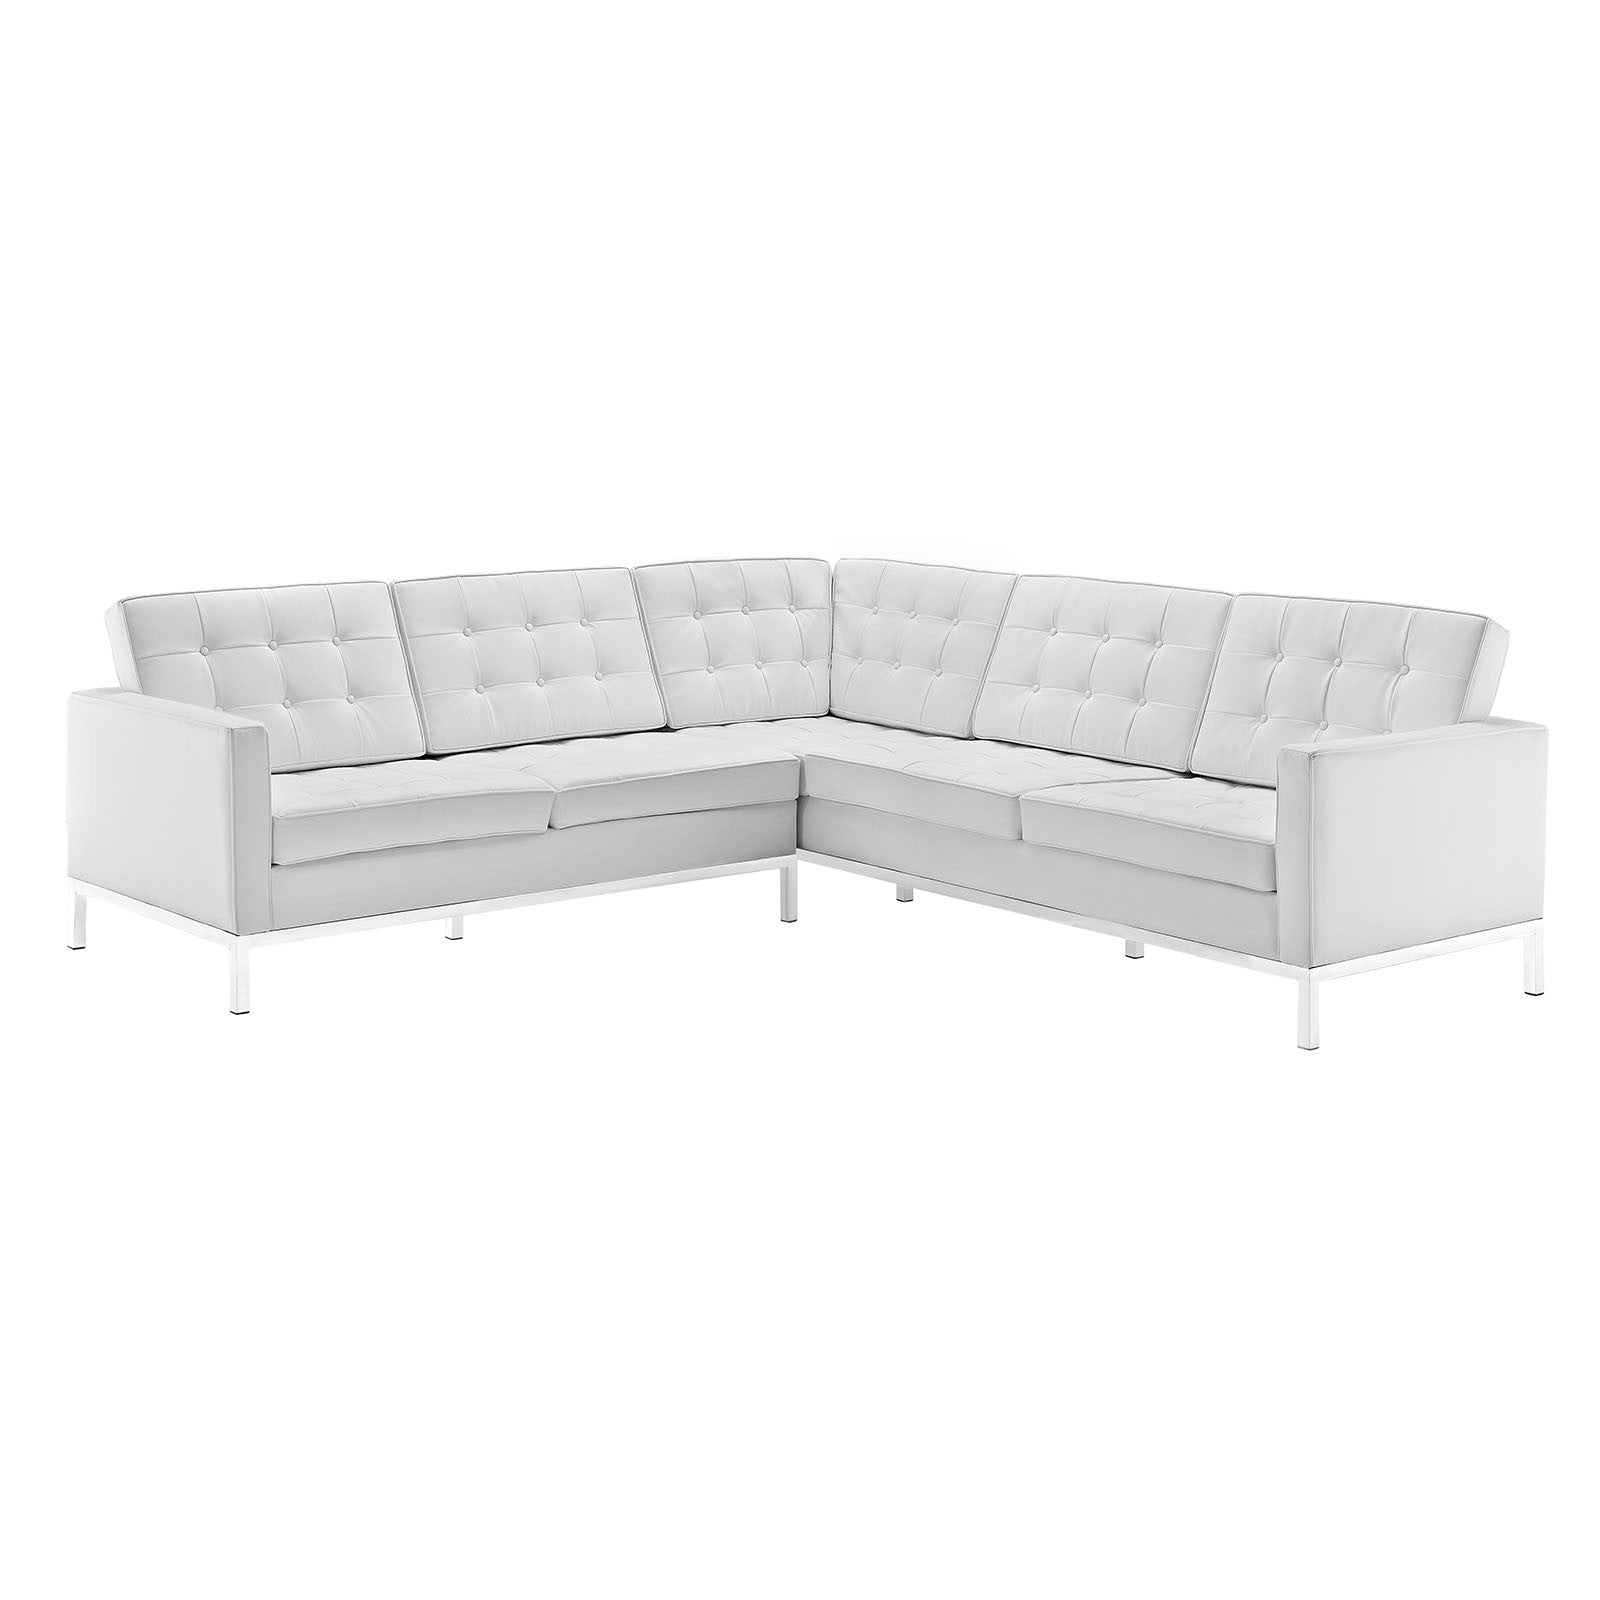 Lyte L-Shaped Leather Sectional Sofa White